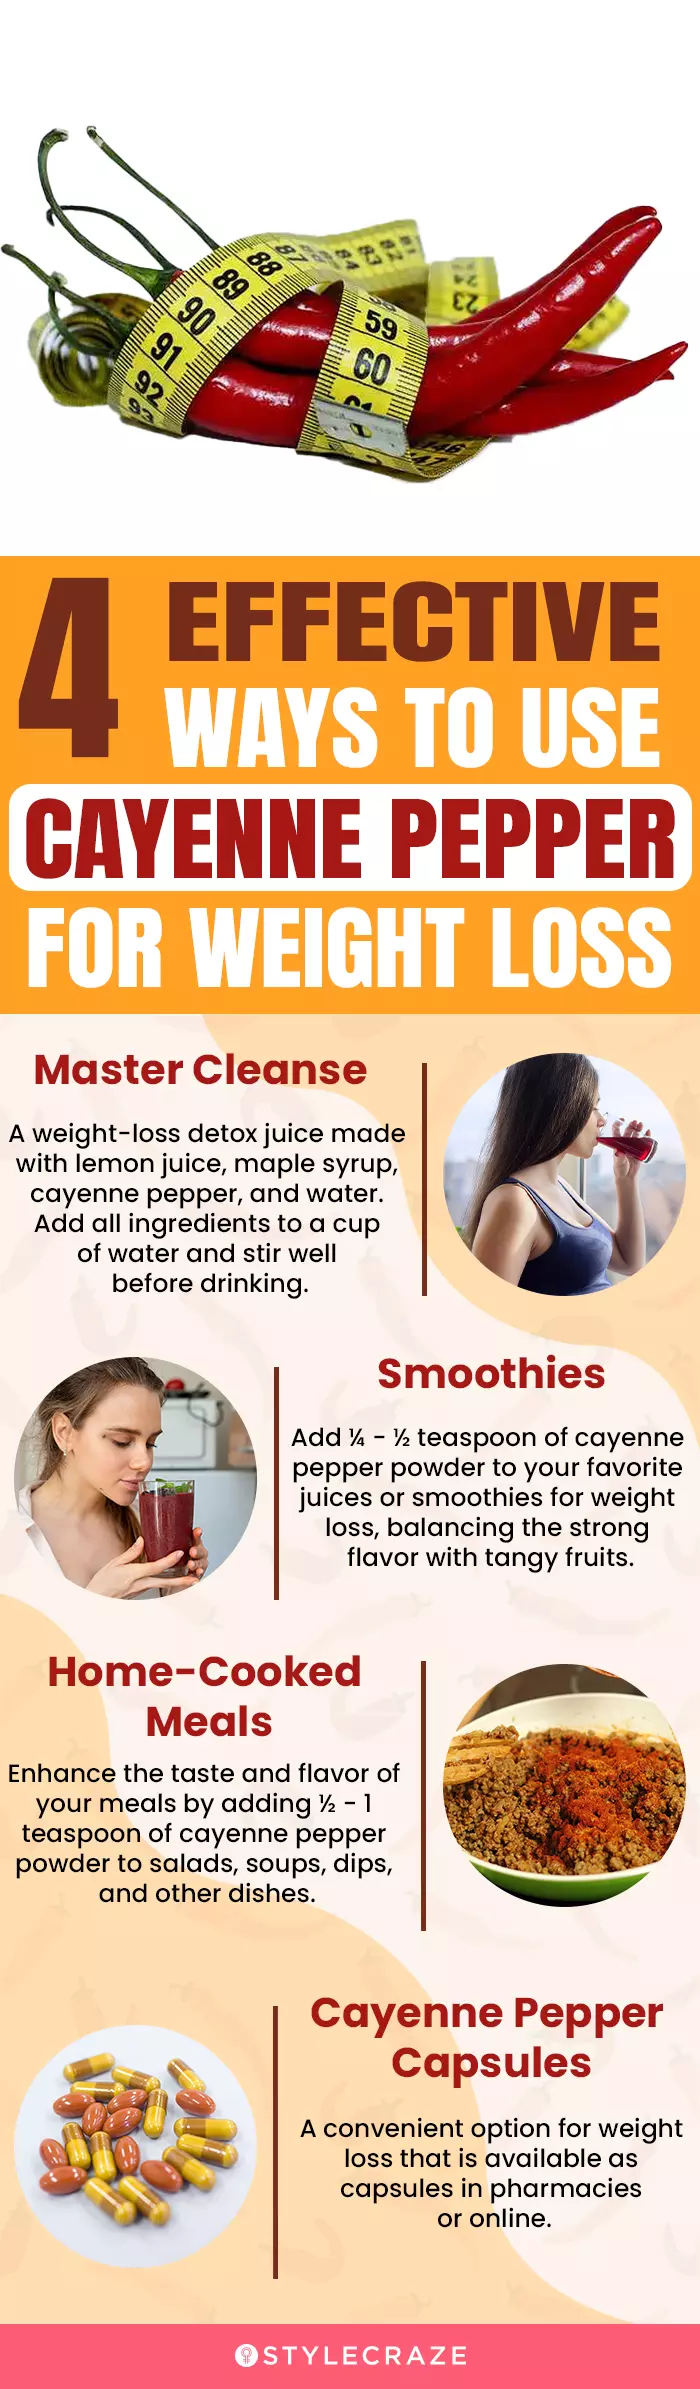 4 effective ways to use cayenne pepper for weight loss (infographic)